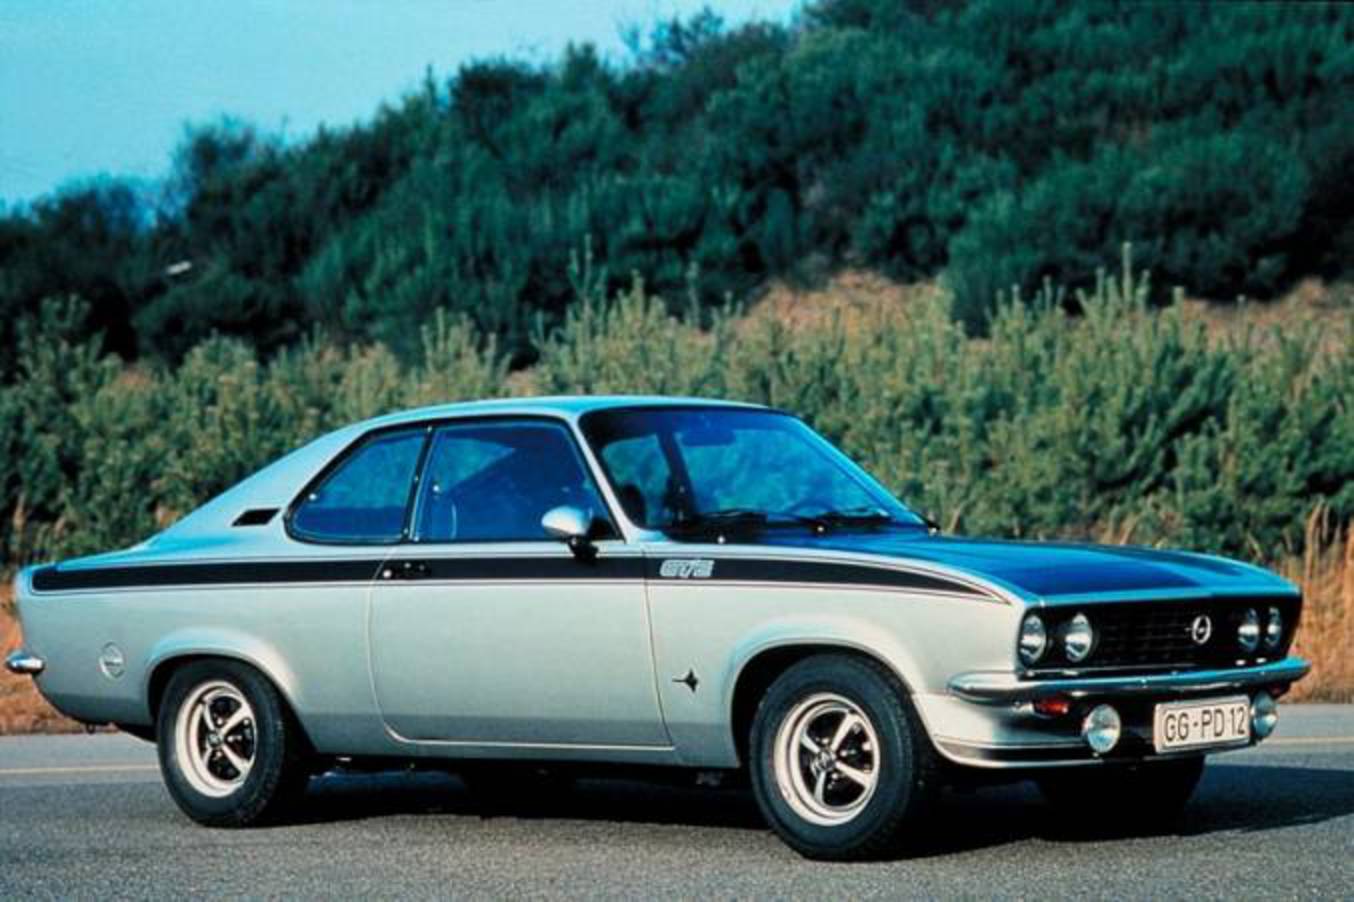 Opel Manta. In 1971, the era of the large, big block pony car was reaching